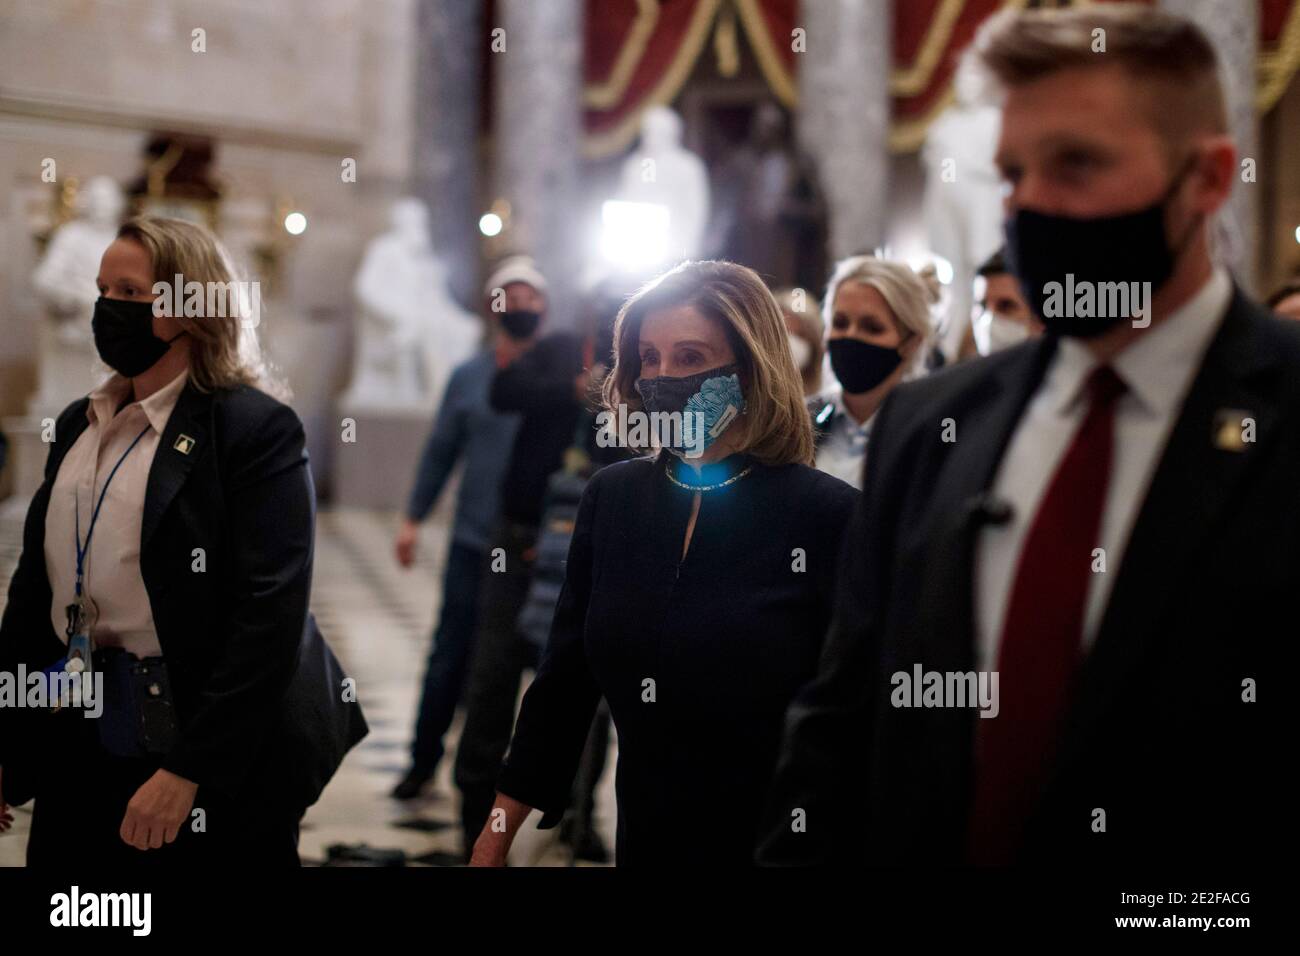 Beijing, USA. 13th Jan, 2021. U.S. House Speaker Nancy Pelosi (C) wearing a protective mask walks through the hallways in Capitol Building in Washington, DC, the United States, Jan. 13, 2021. A majority of lawmakers in the U.S. House on Wednesday voted for impeaching President Donald Trump over 'incitement of insurrection,' making him the first president to be impeached twice. Credit: Ting Shen/Xinhua/Alamy Live News Stock Photo